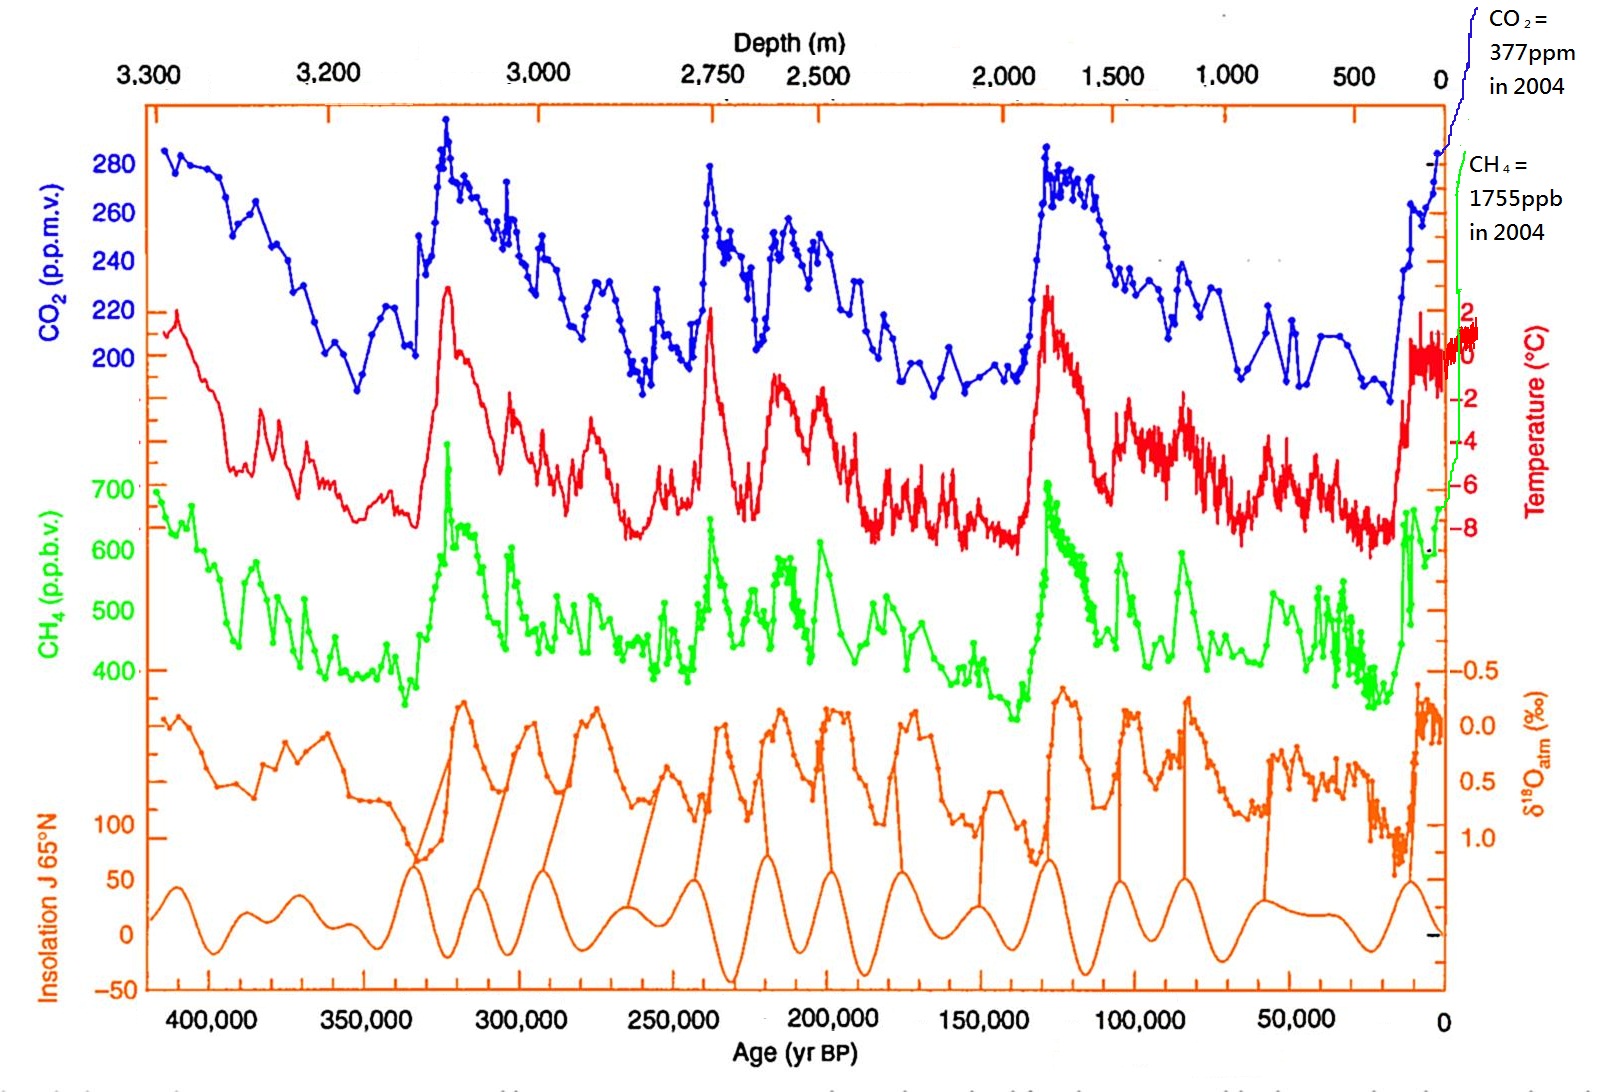 420,000 years of ice core data from Vostok, Antarctica research station. Current period is at left. From bottom to top: * Solar variation at 65°N due to en:Milankovitch cycles (connected to 18O). * 18O isotope of oxygen. * Levels of methane (CH4). * Relative temperature. * Levels of carbon dioxide (CO2). From top to bottom: * Levels of carbon dioxide (CO2). * Relative temperature. * Levels of methane (CH4). * 18O isotope of oxygen. * Solar variation at 65°N due to en:Milankovitch cycles (connected to 18O). Wikimedia Commons.